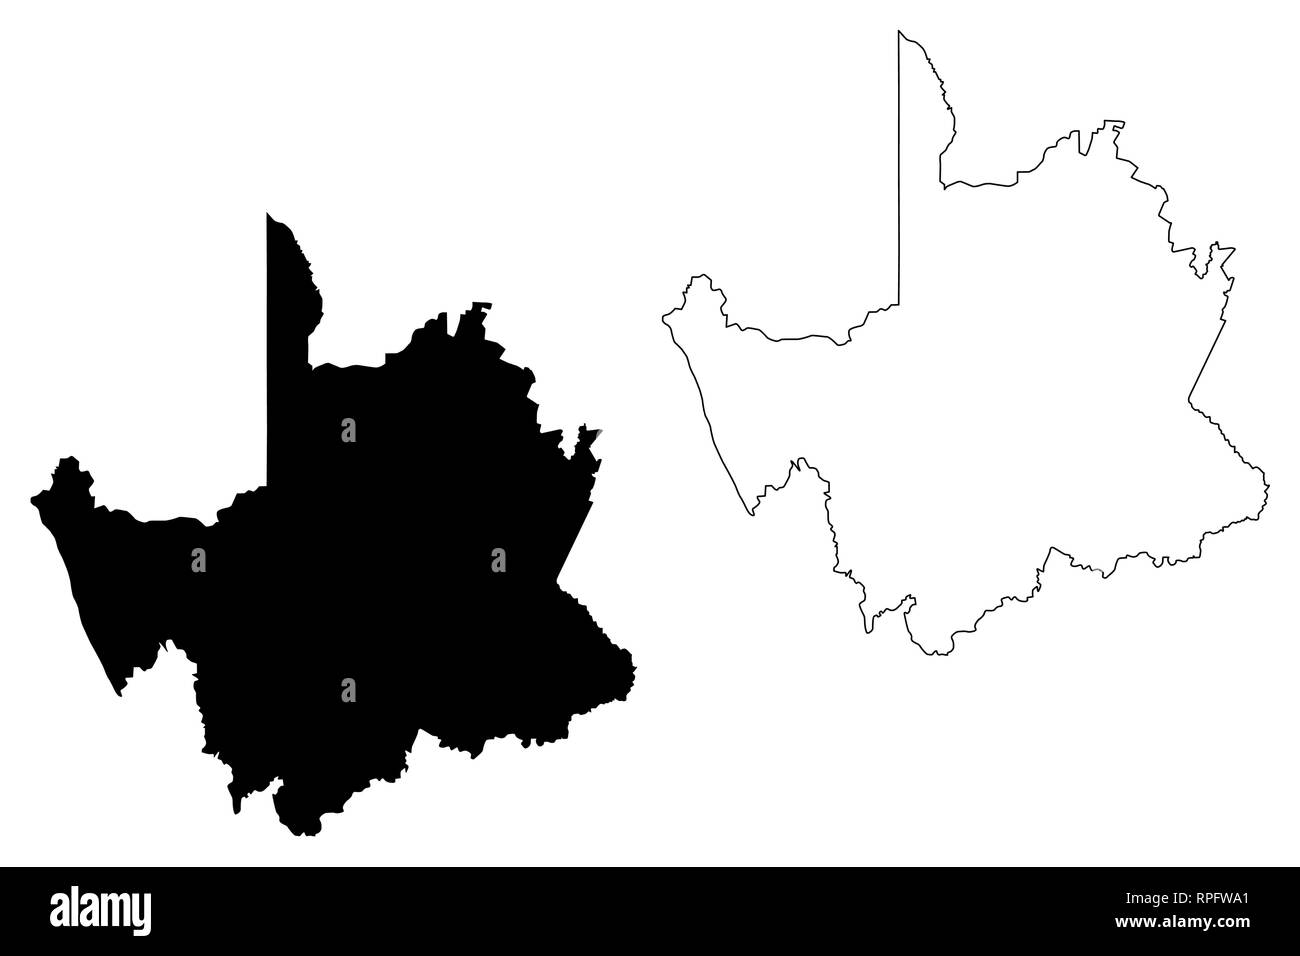 Northern Cape Province (Provinces of South Africa, Republic of South Africa, Administrative divisions, RSA) map vector illustration, scribble sketch N Stock Vector